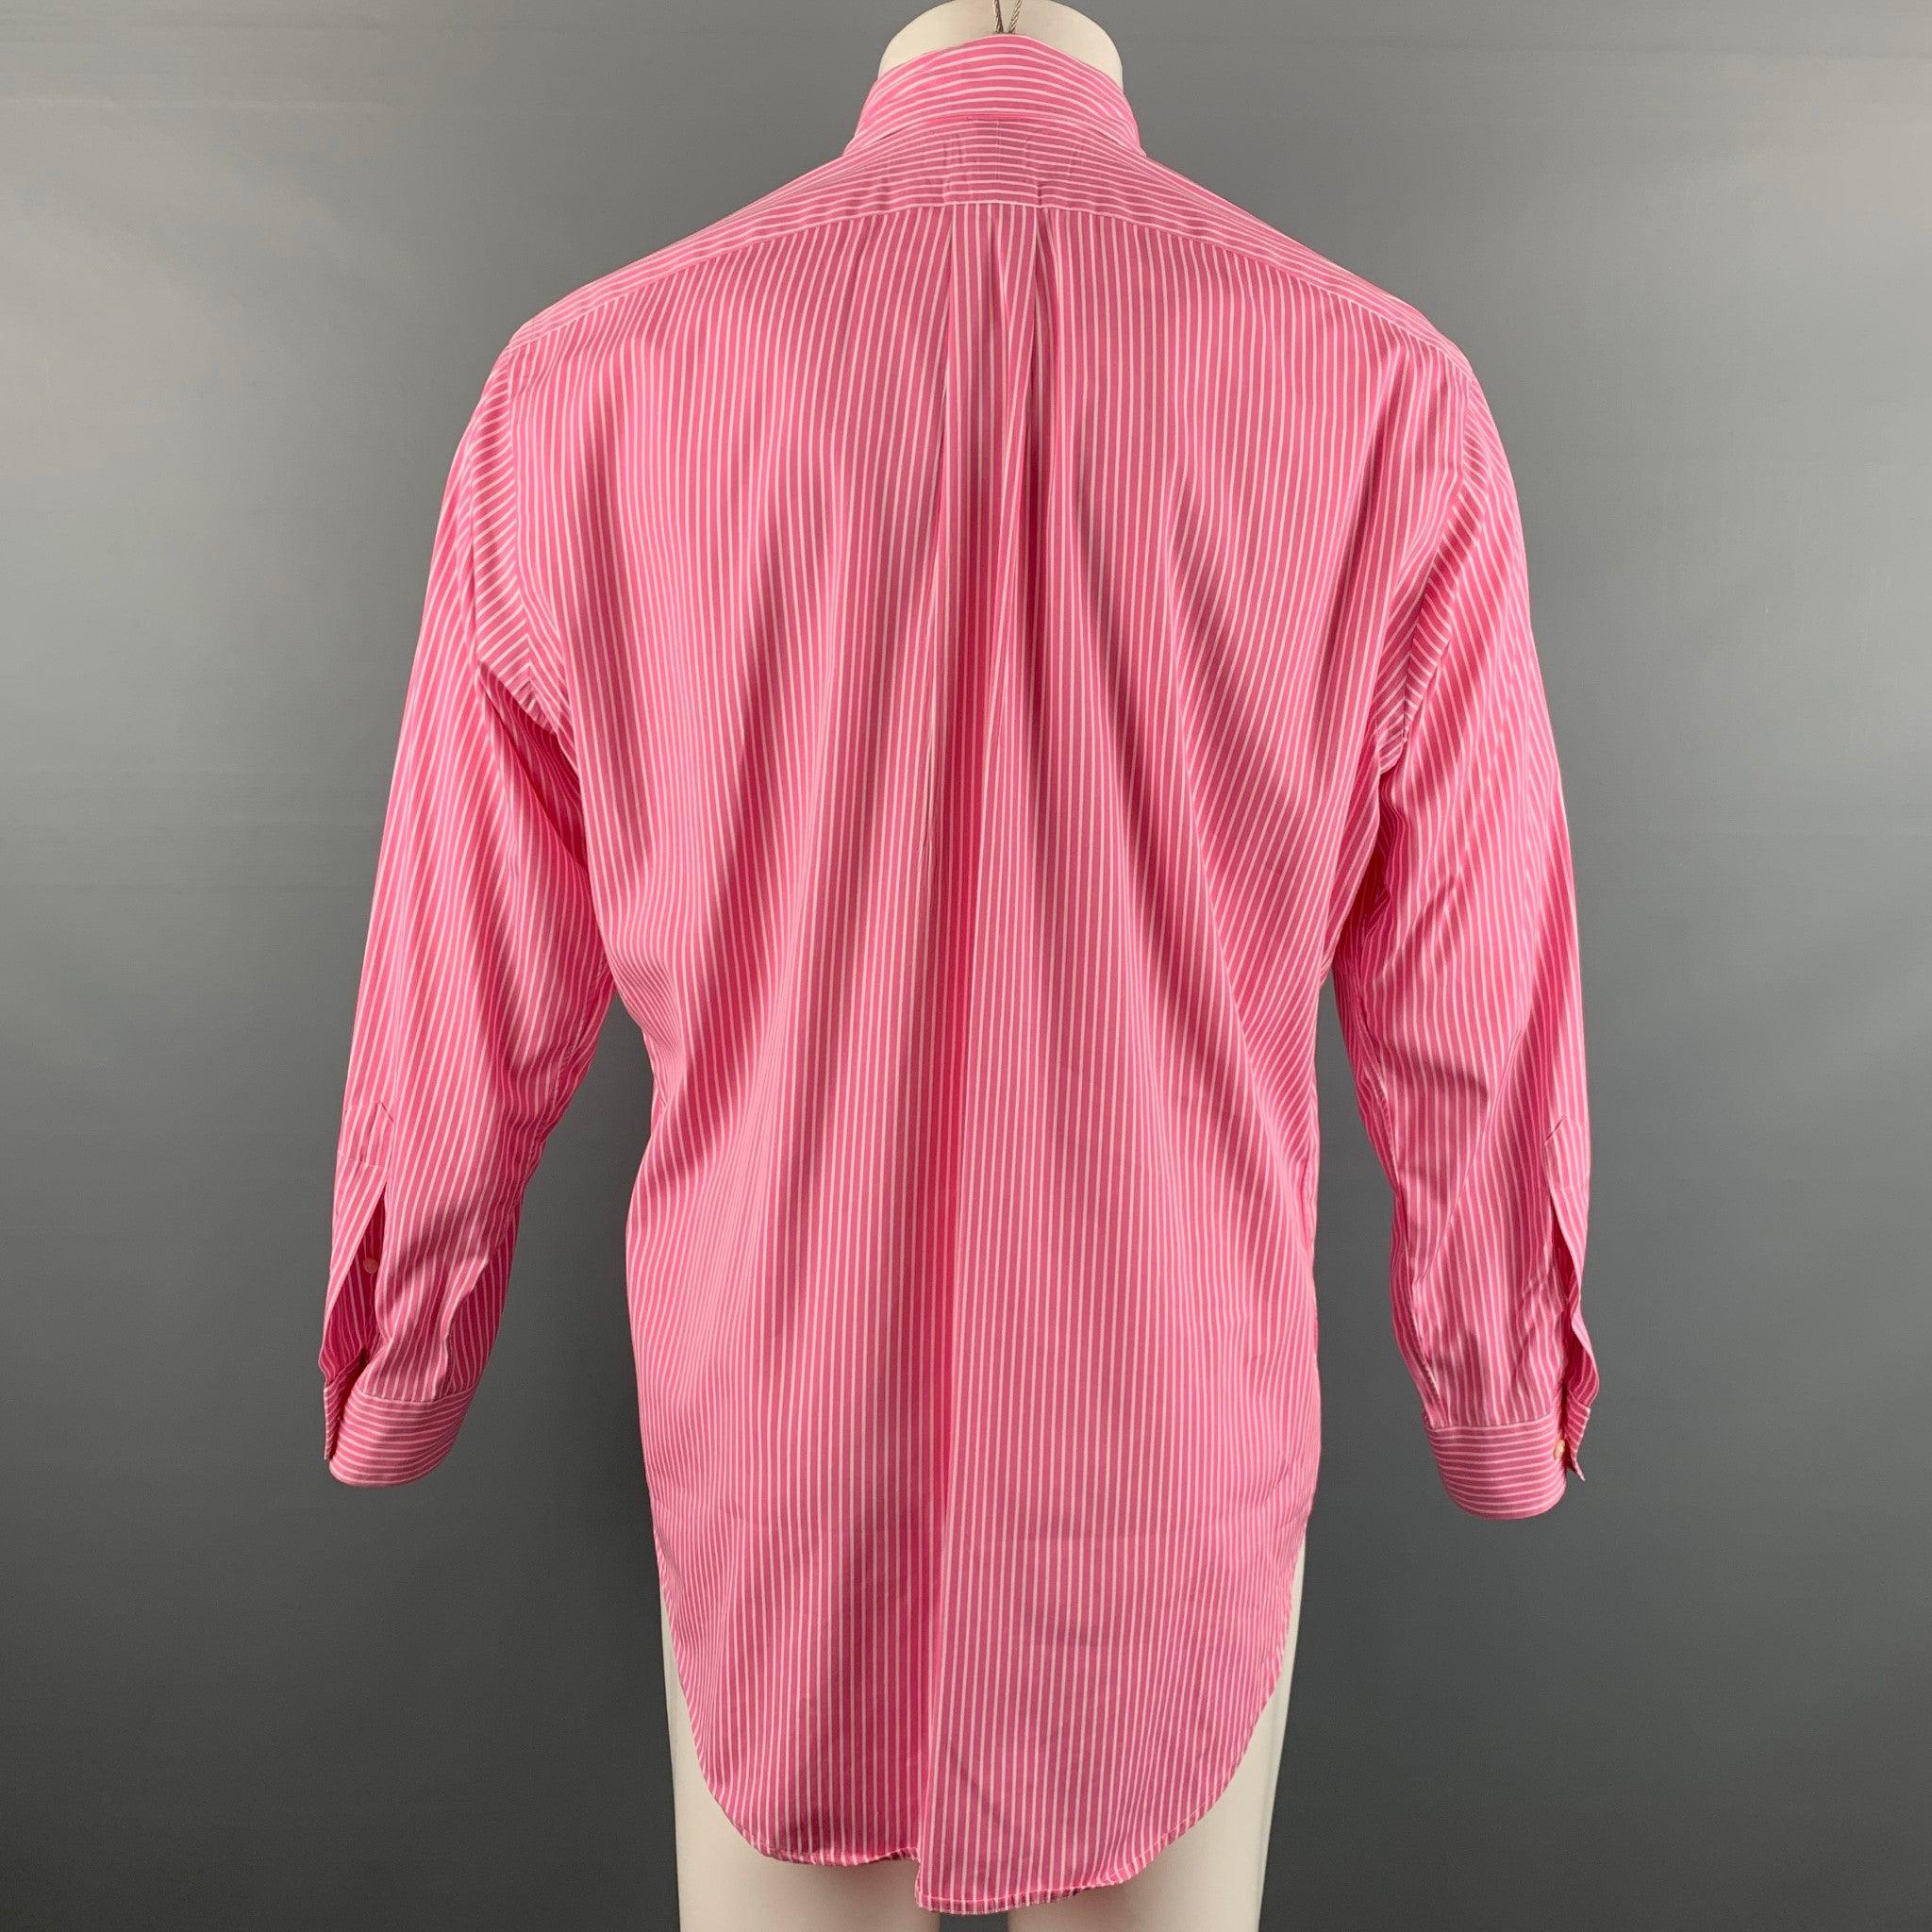 RALPH LAUREN Size M Pink White Stripe Cotton Long Sleeve Shirt In Good Condition For Sale In San Francisco, CA